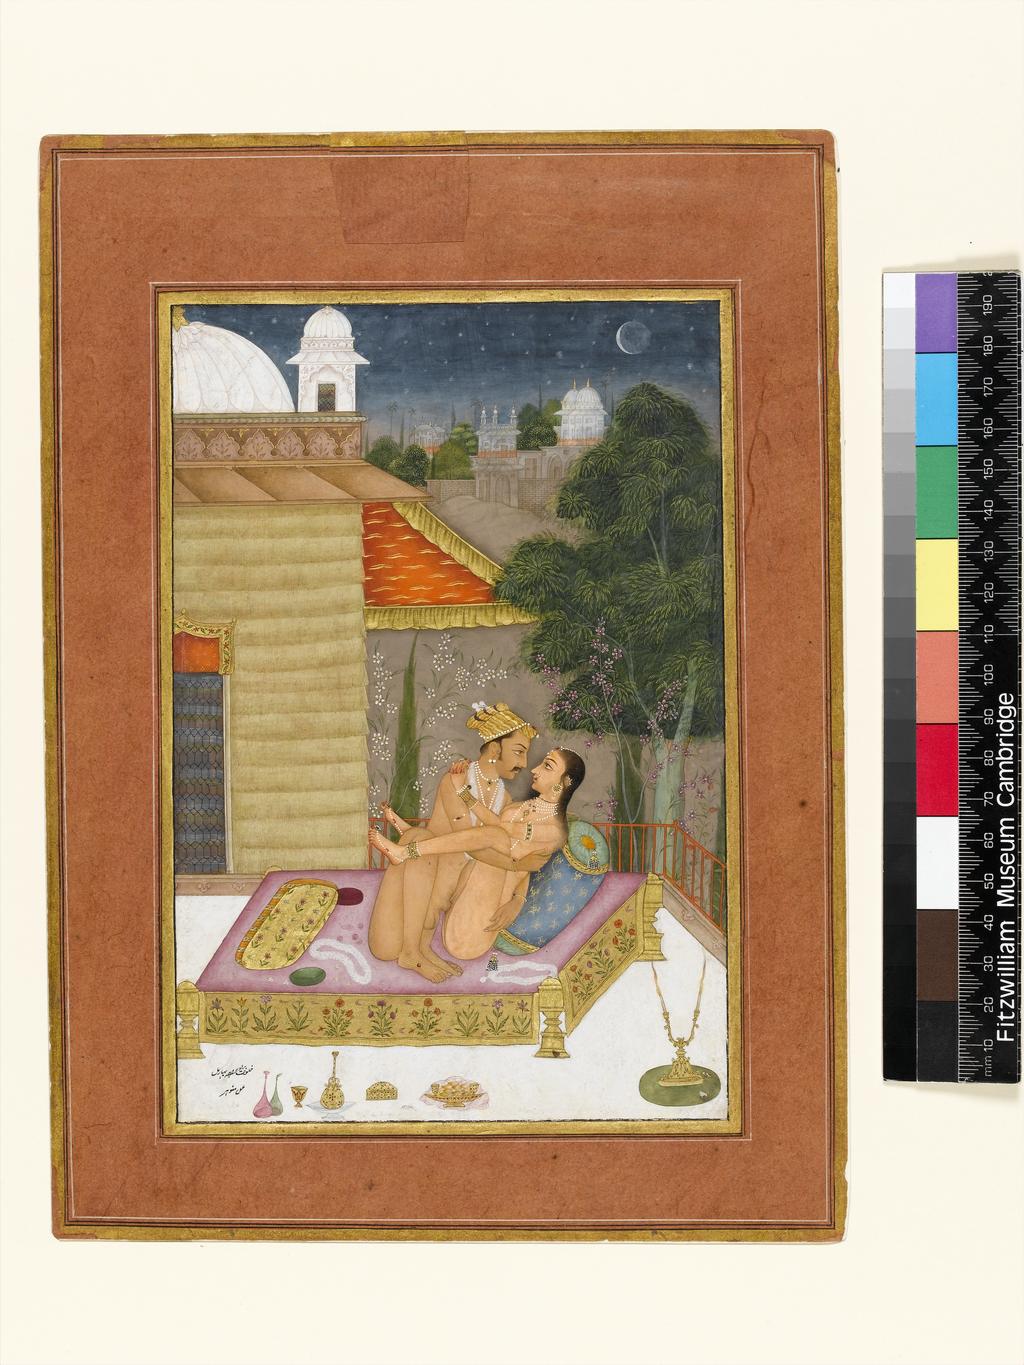 An image of The private pleasure of the brother of Raja Bhar Mal by Manohar. Bodycolour including white, pen and ink with gold on paper, height 200mm, width 135mm, circa 1678.